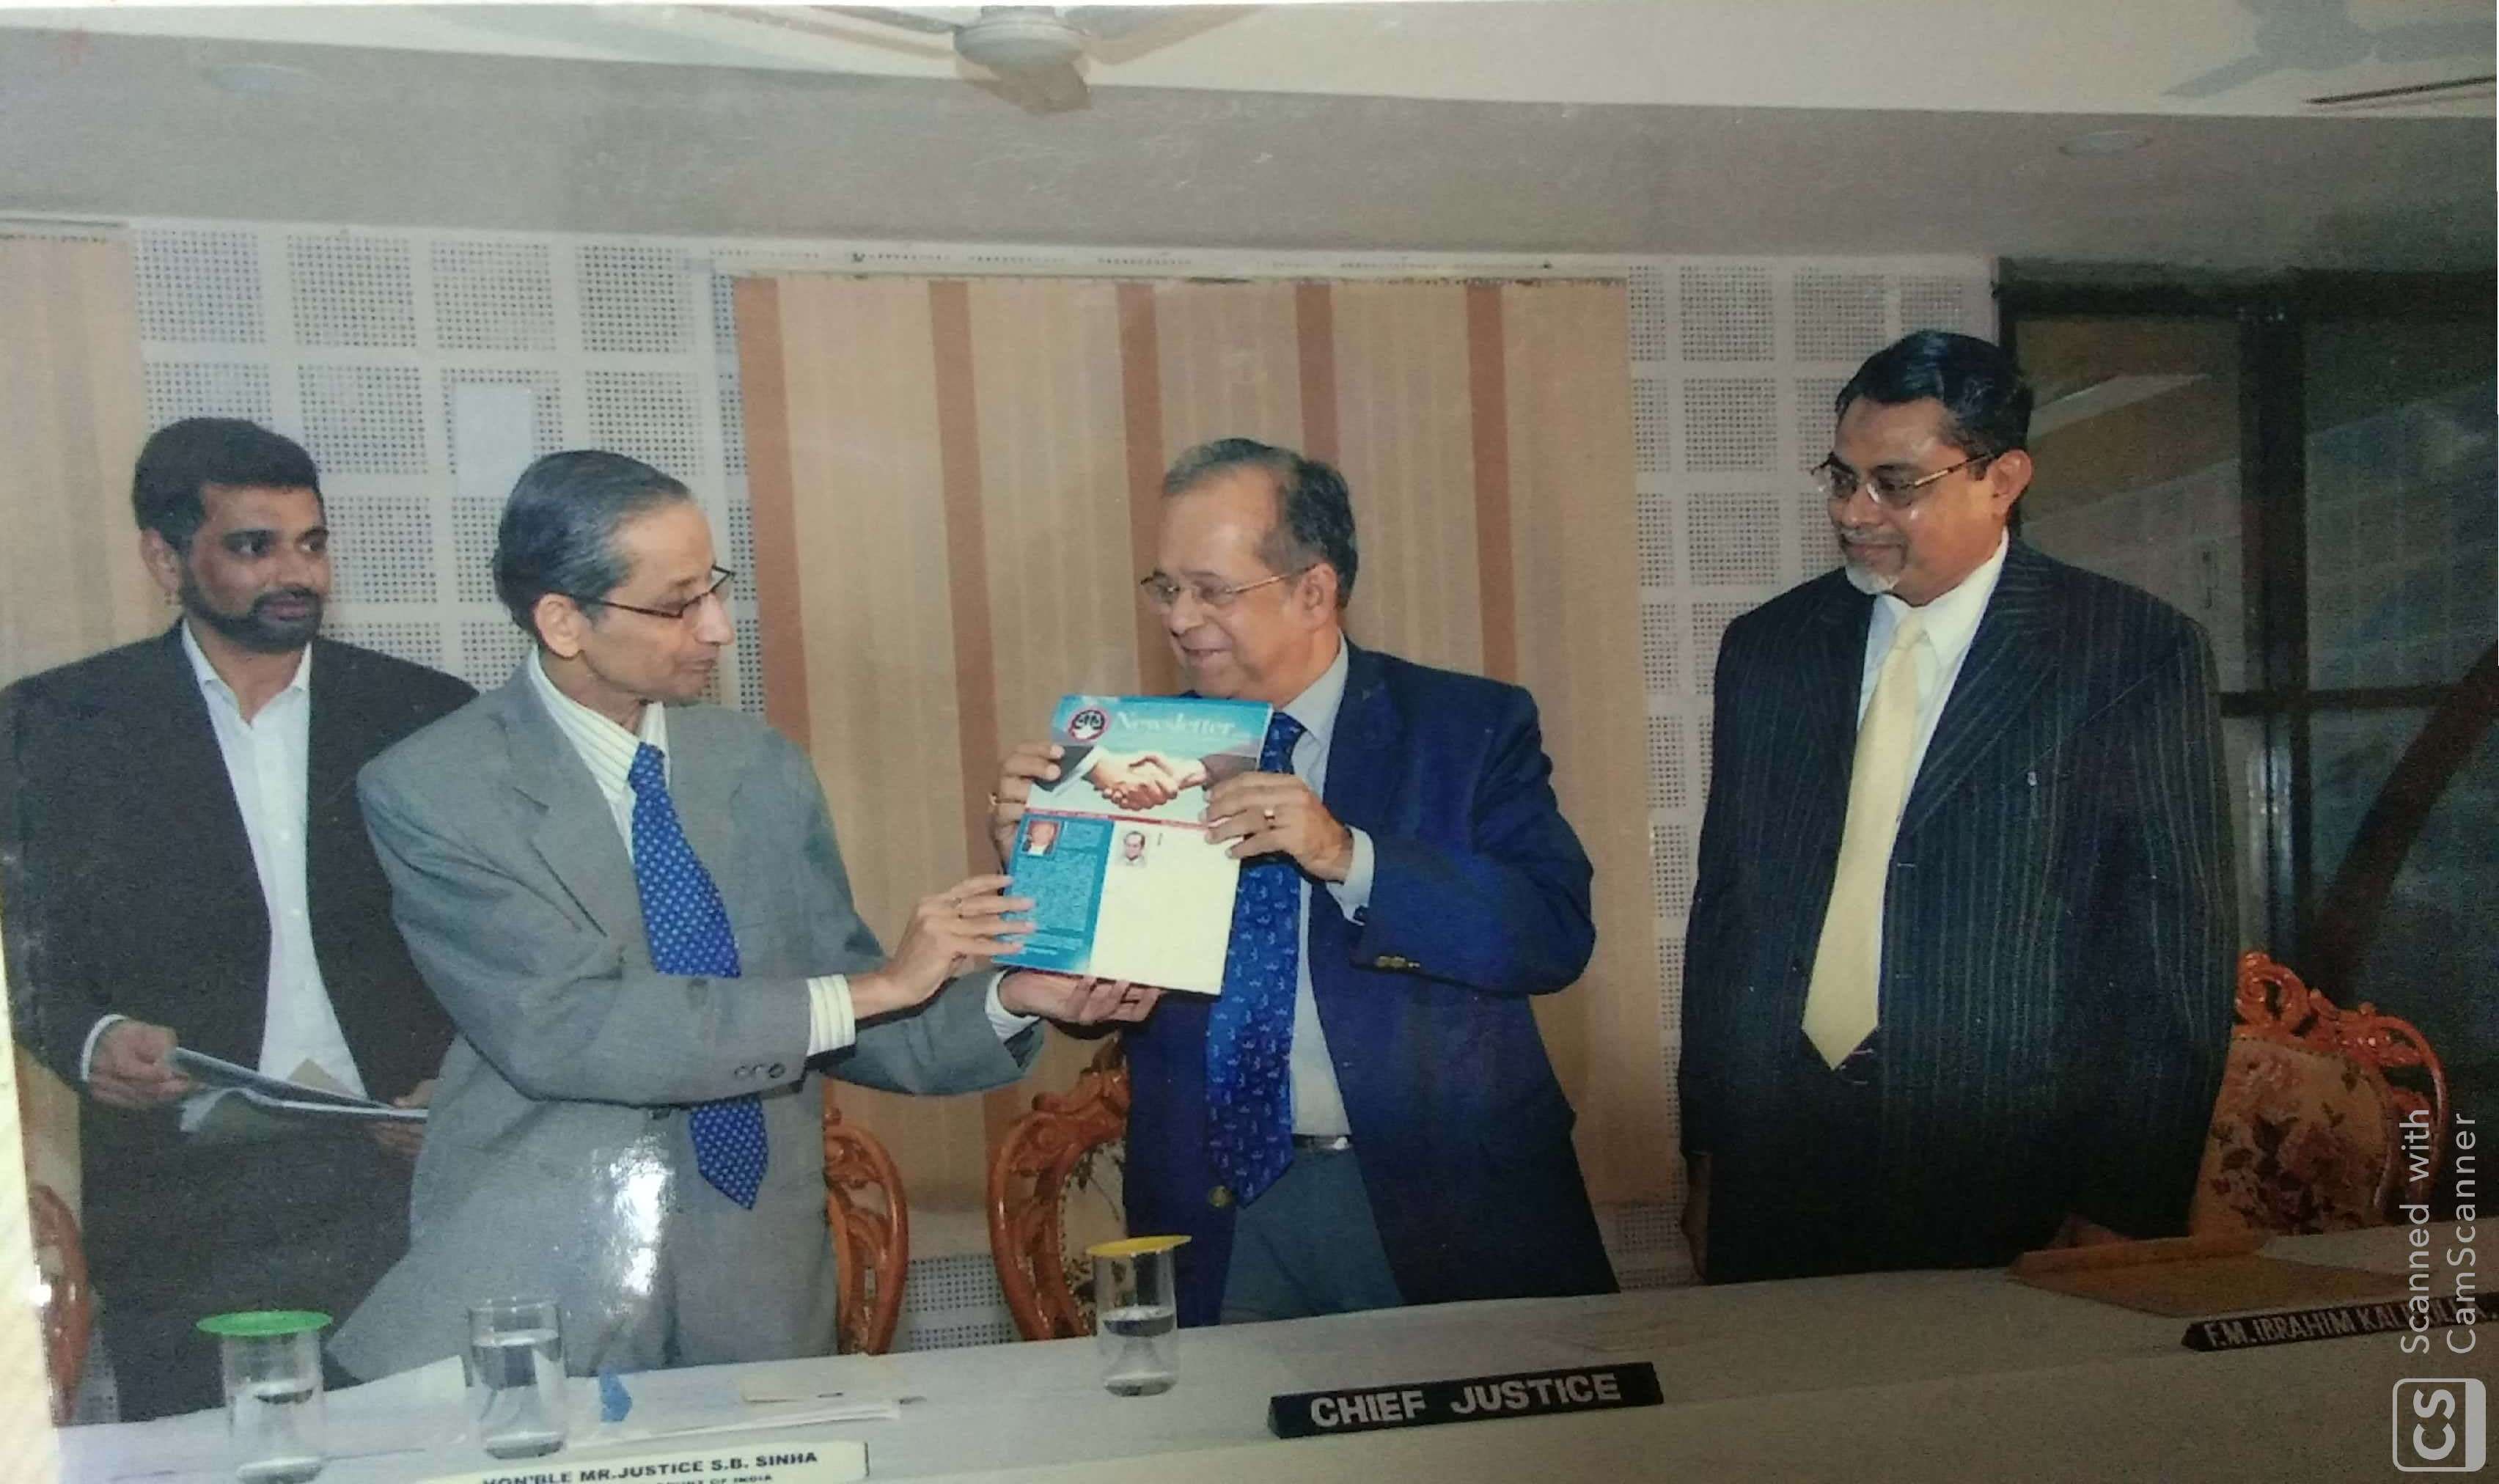 Release of First News Letter of TNMCC by Hon’ble Mr.Justice S.B. Sinha, former Judge, Supreme Court of India